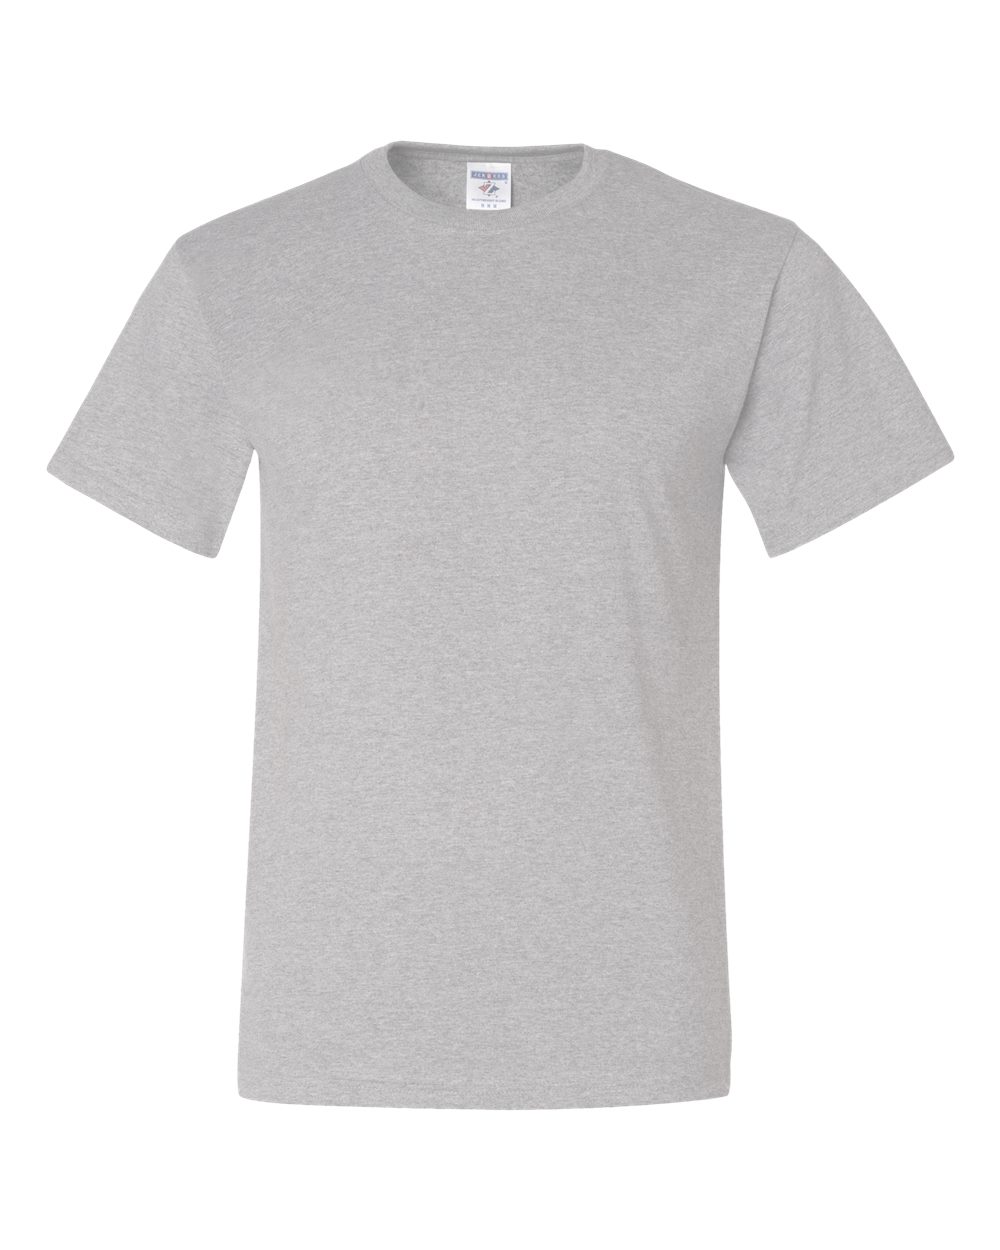 Jerzees 29MT Dri-Power Active Tall 50/50 T-Shirt - From $6.49